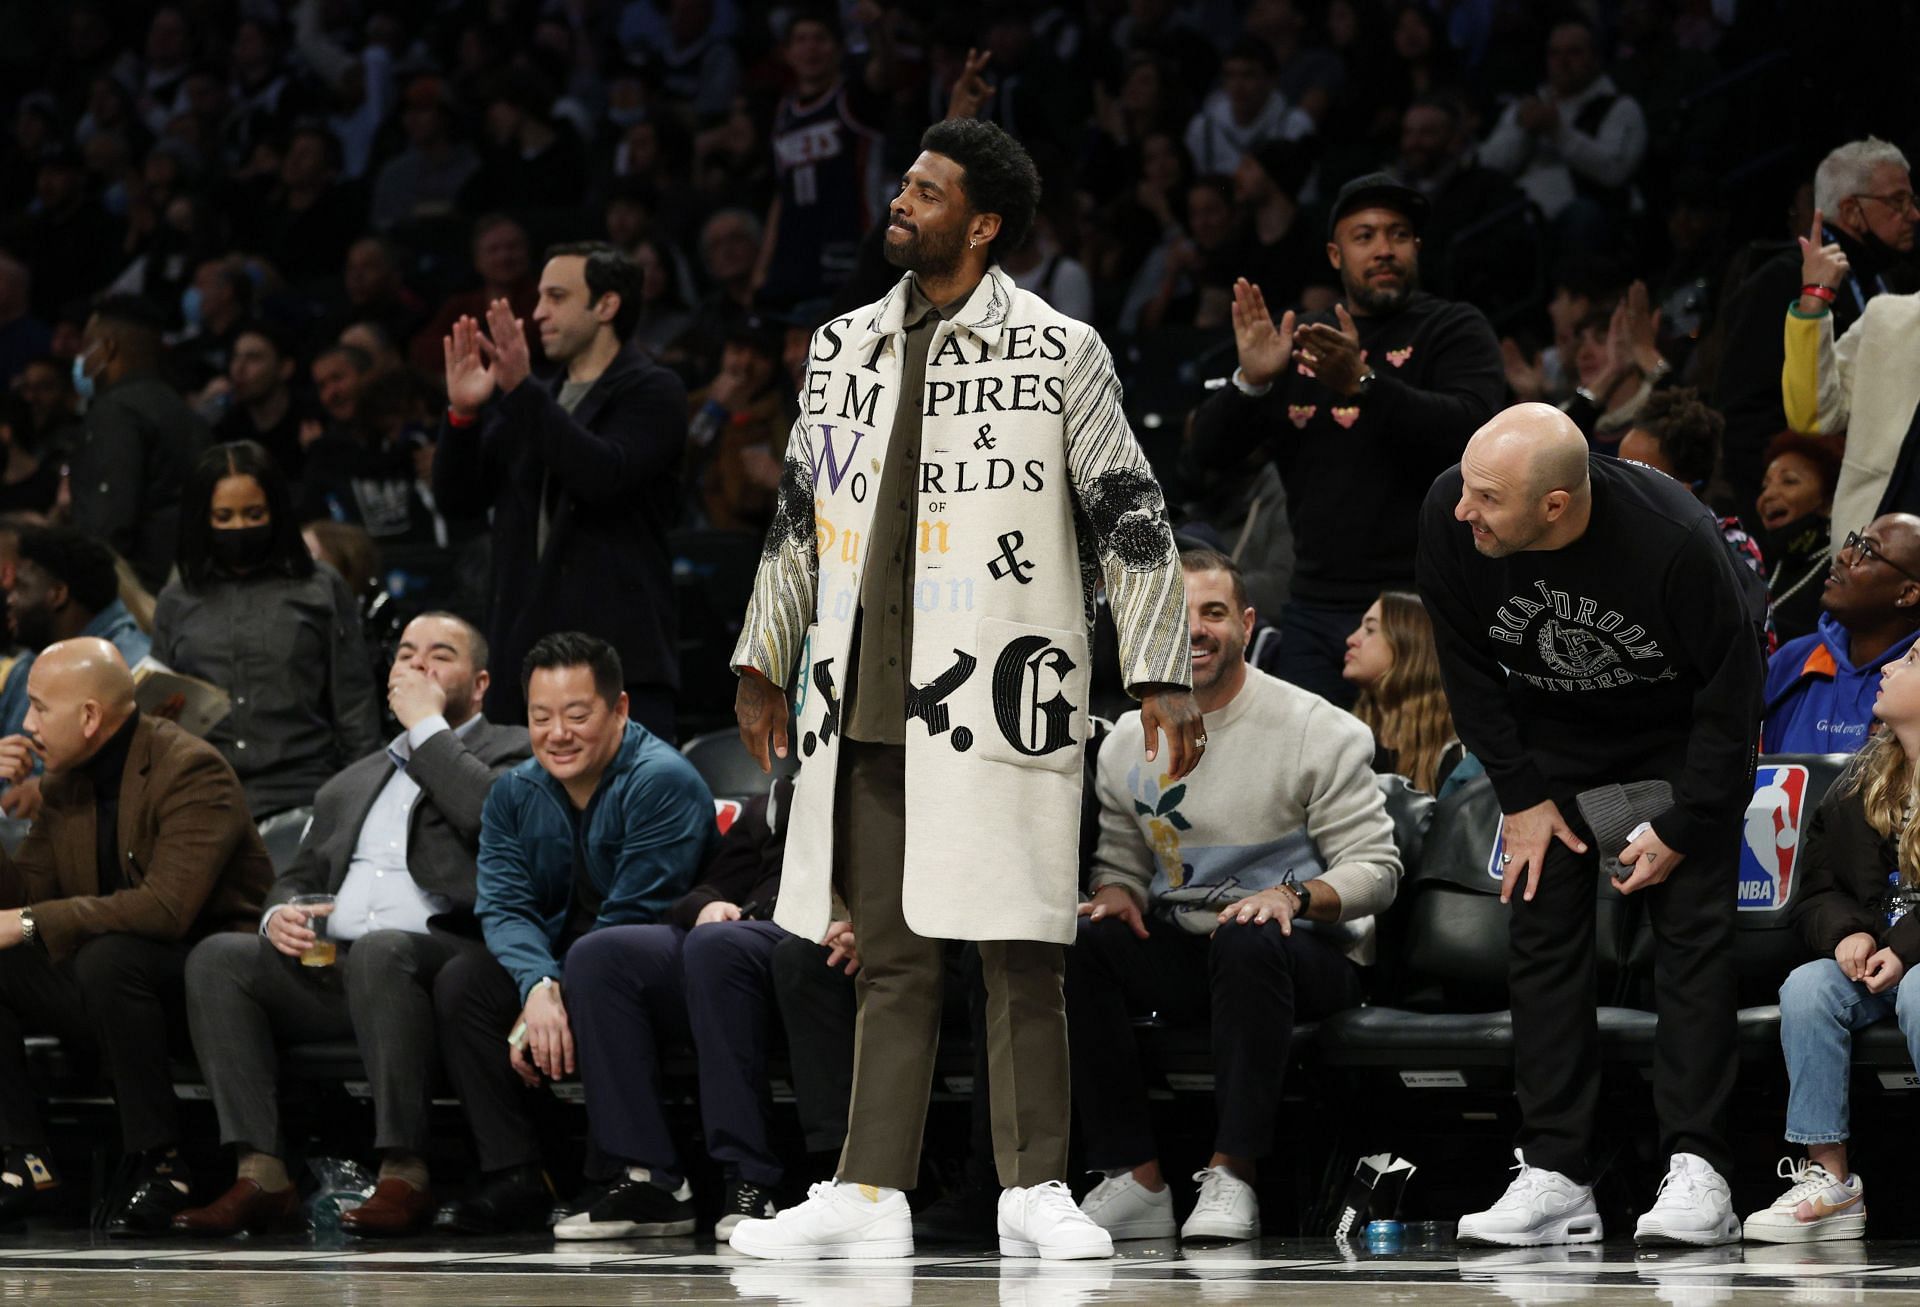 Kyrie Irving of the Brooklyn Nets attends the second half against the New York Knicks at Barclays Center on Sunday in the Brooklyn borough of New York City. The Nets won 110-107.